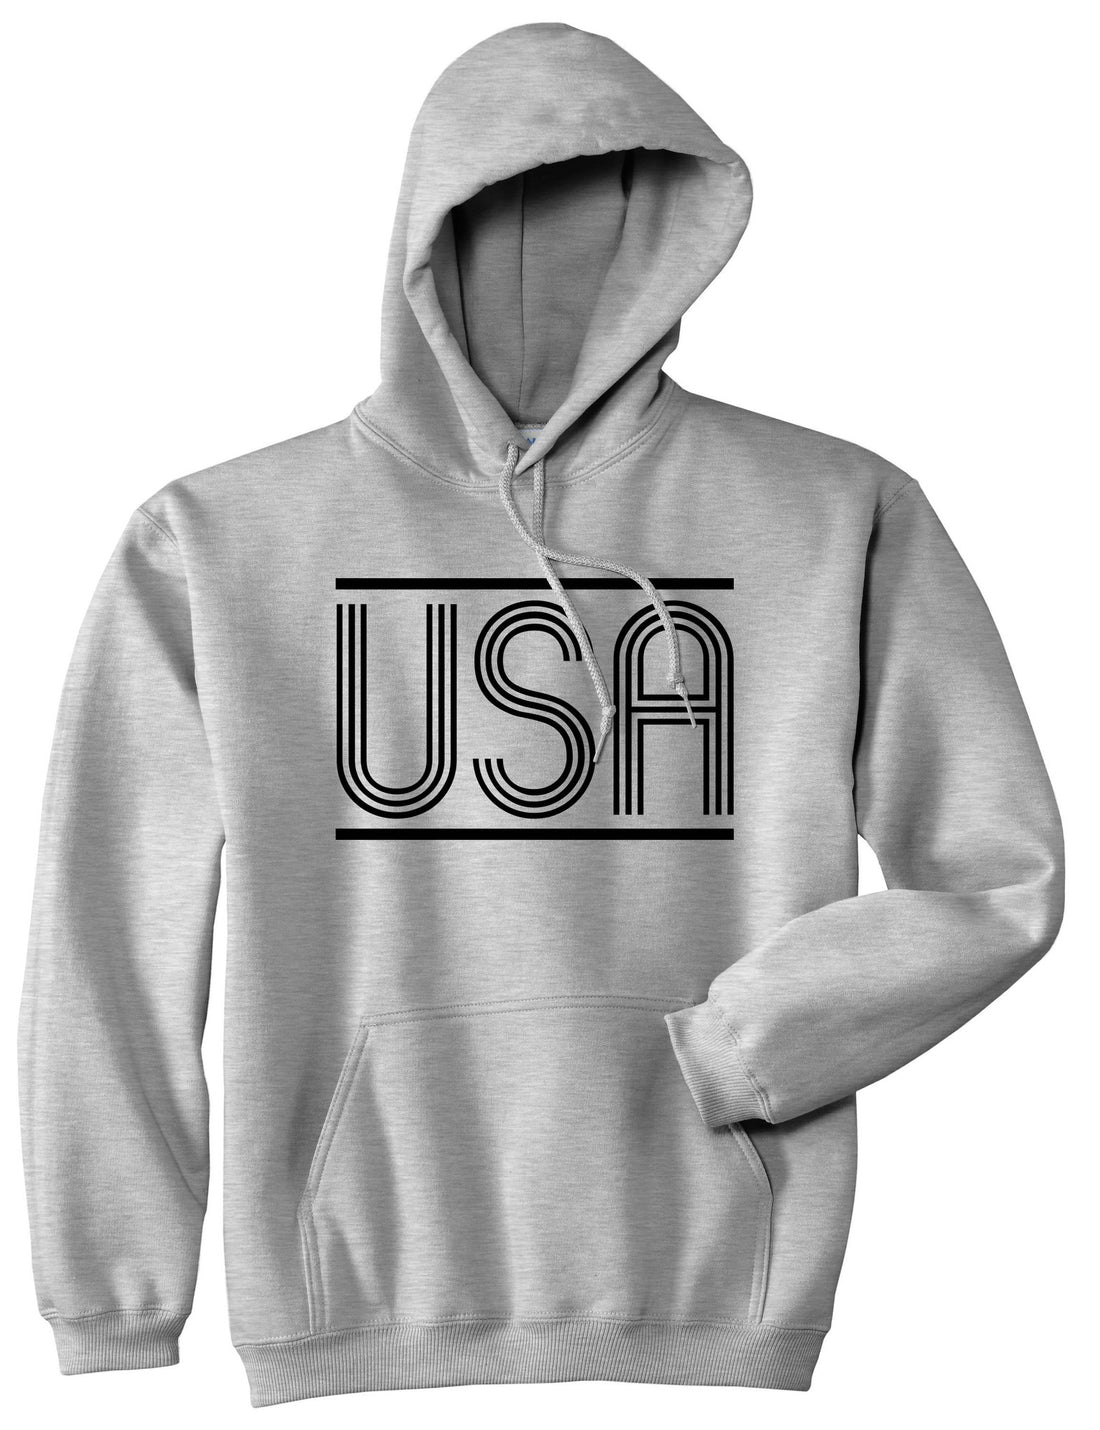 USA America Fall15 Pullover Hoodie Hoody in Grey by Kings Of NY